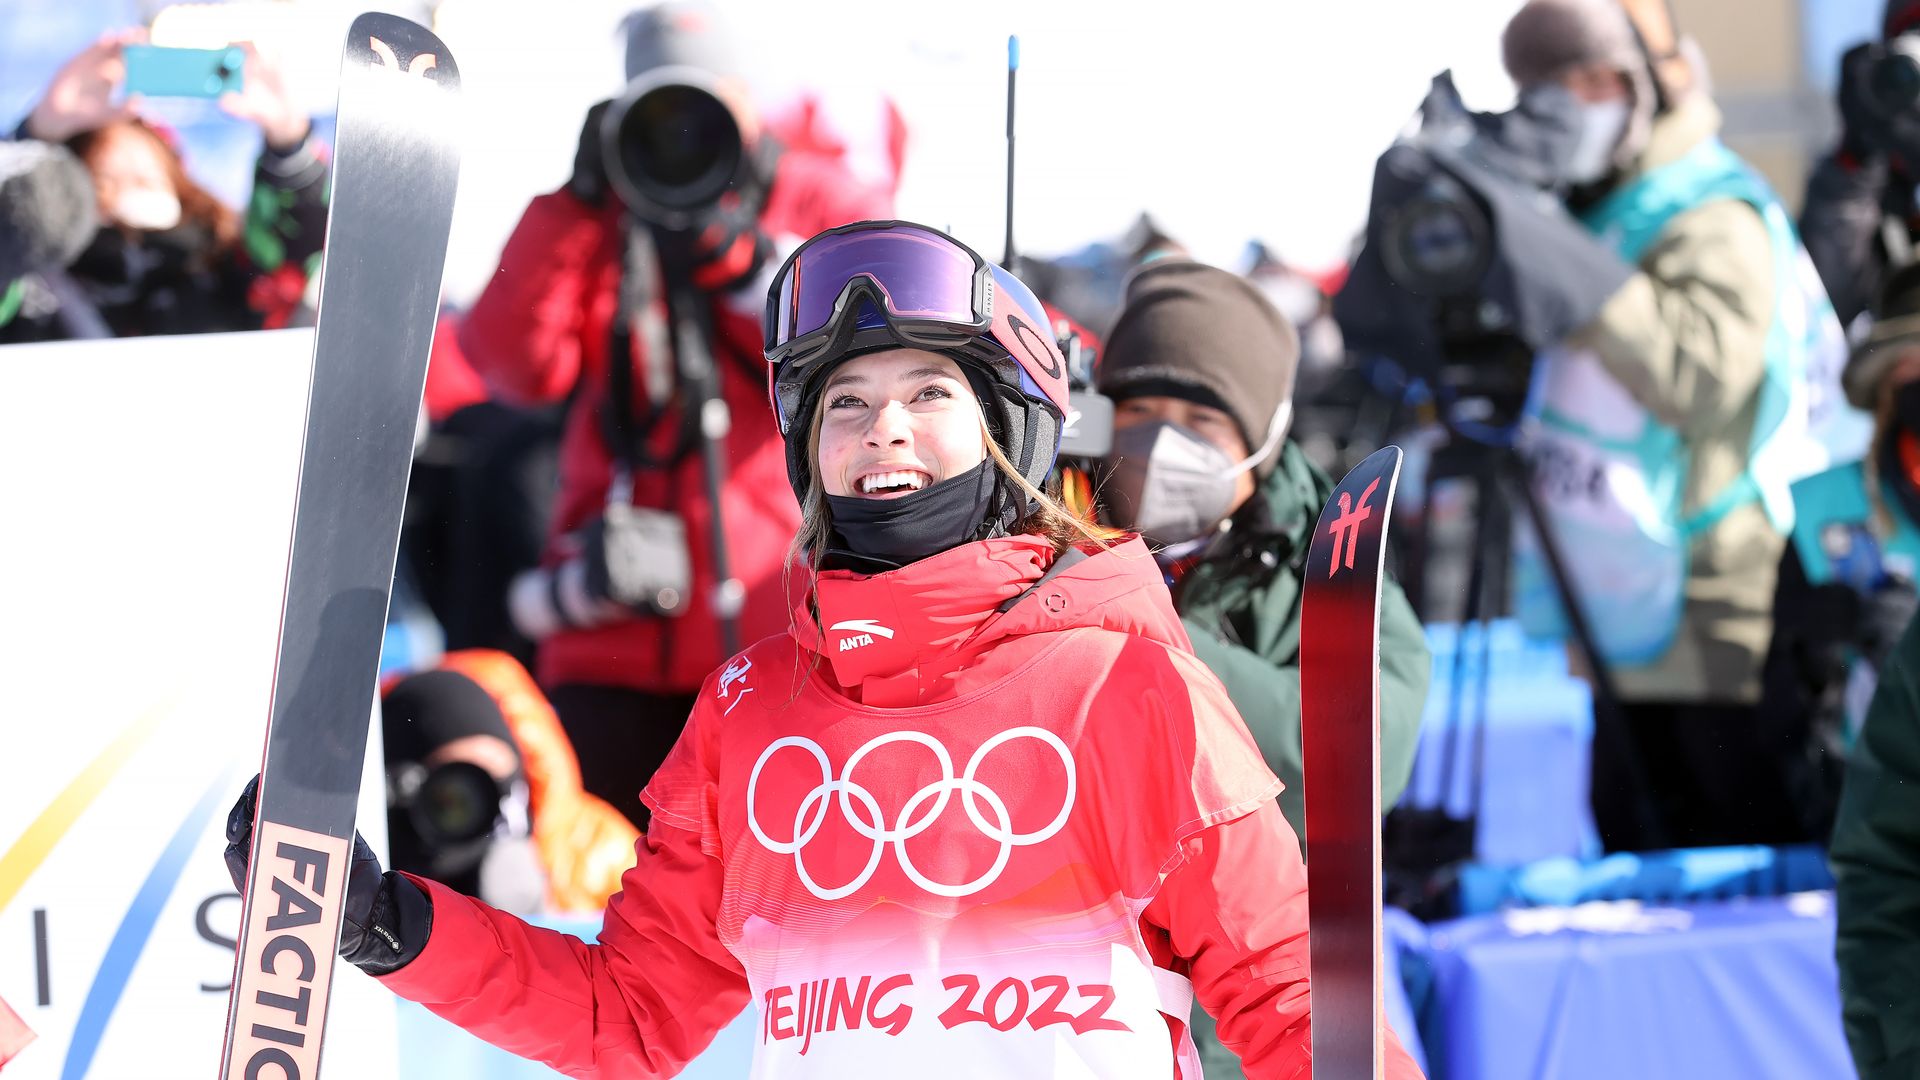 Gold medallist Ailing Eileen Gu of Team China is seen after her final run during the Women's Freeski Halfpipe at the Beijing 2022 Winter Olympics  on February 18, 2022 in Zhangjiakou, China. 